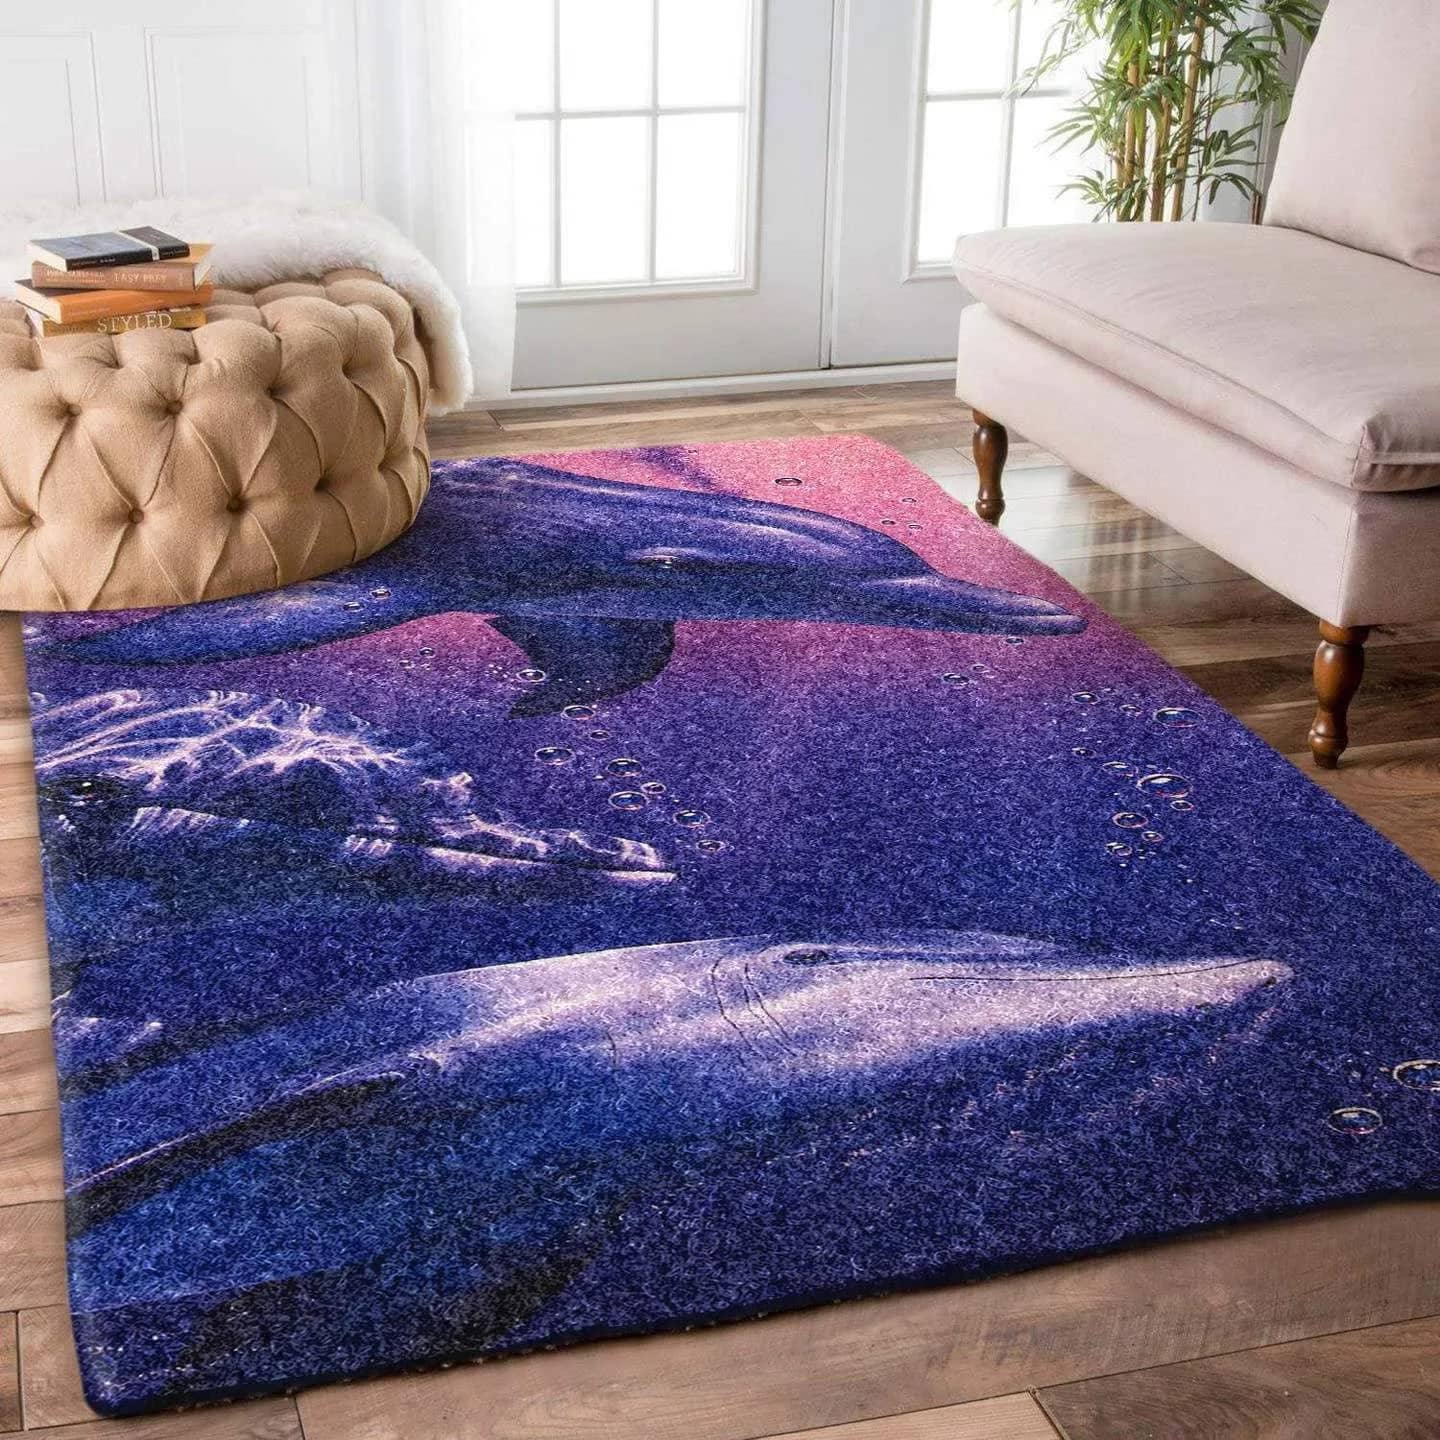 Dolphin Limited Edition Amazon Best Seller Sku 264949 Rug